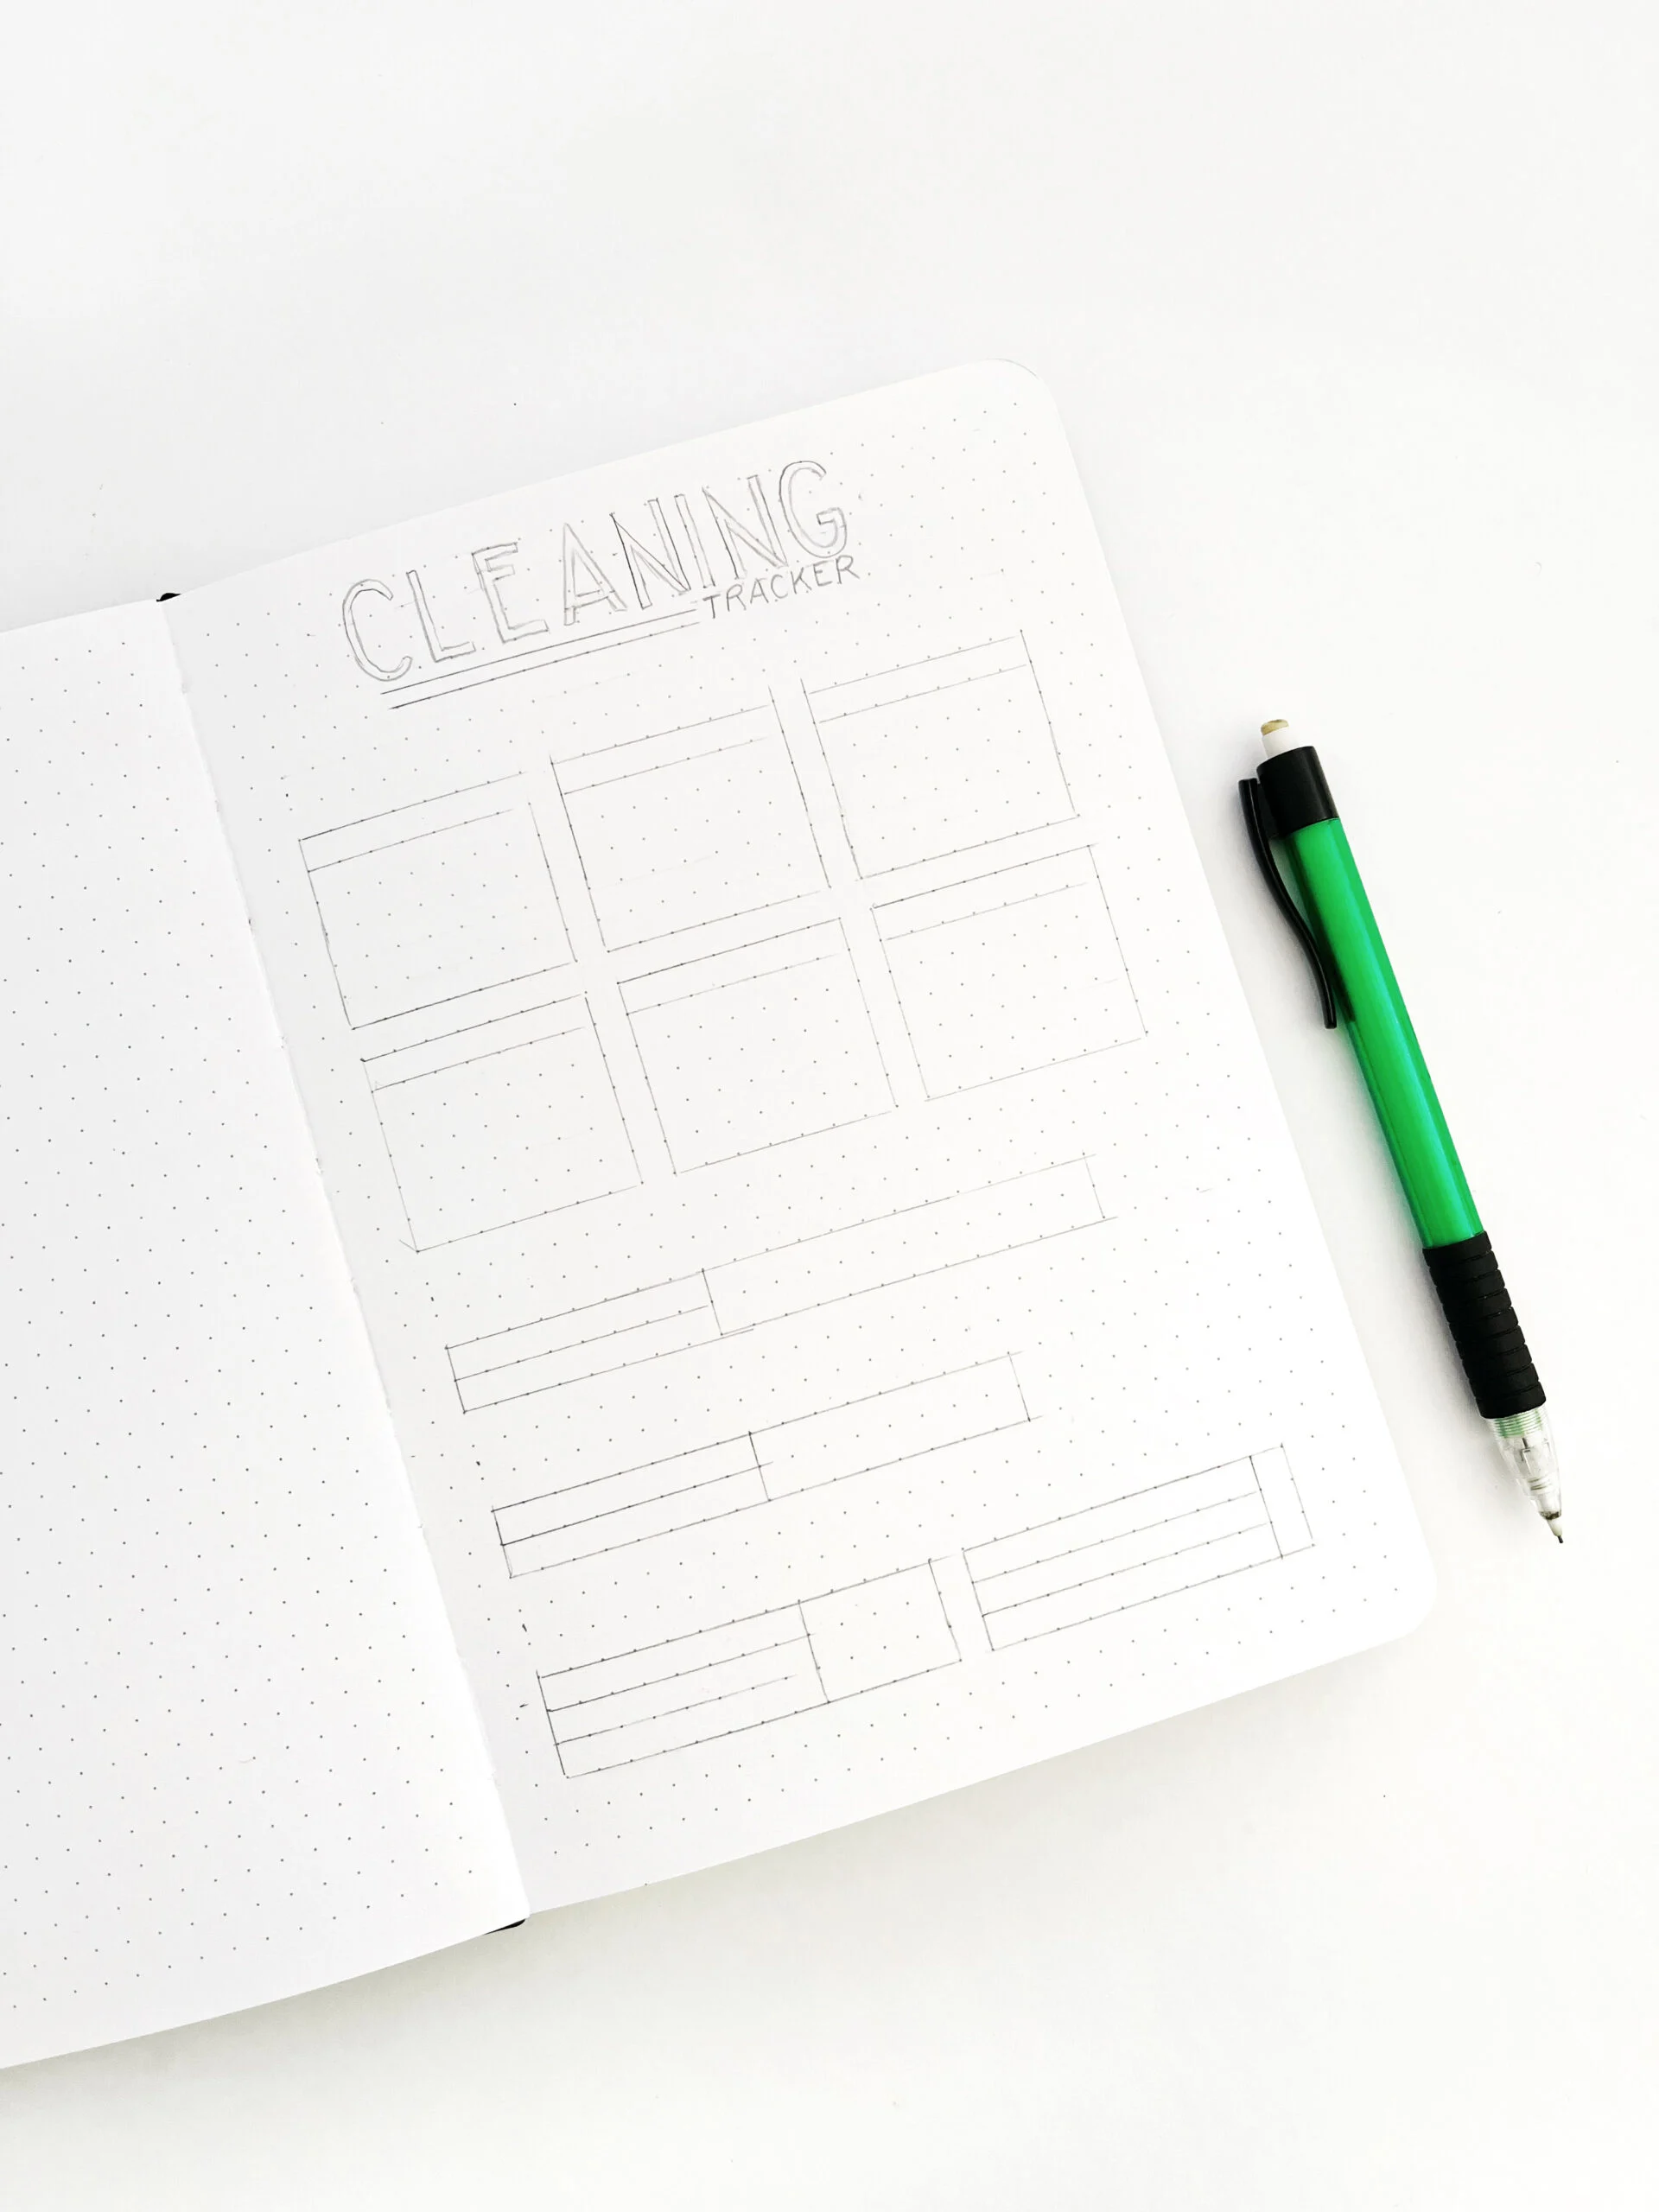 A bullet journal cleaning tracker layout penciled in using grids in a bullet journal.